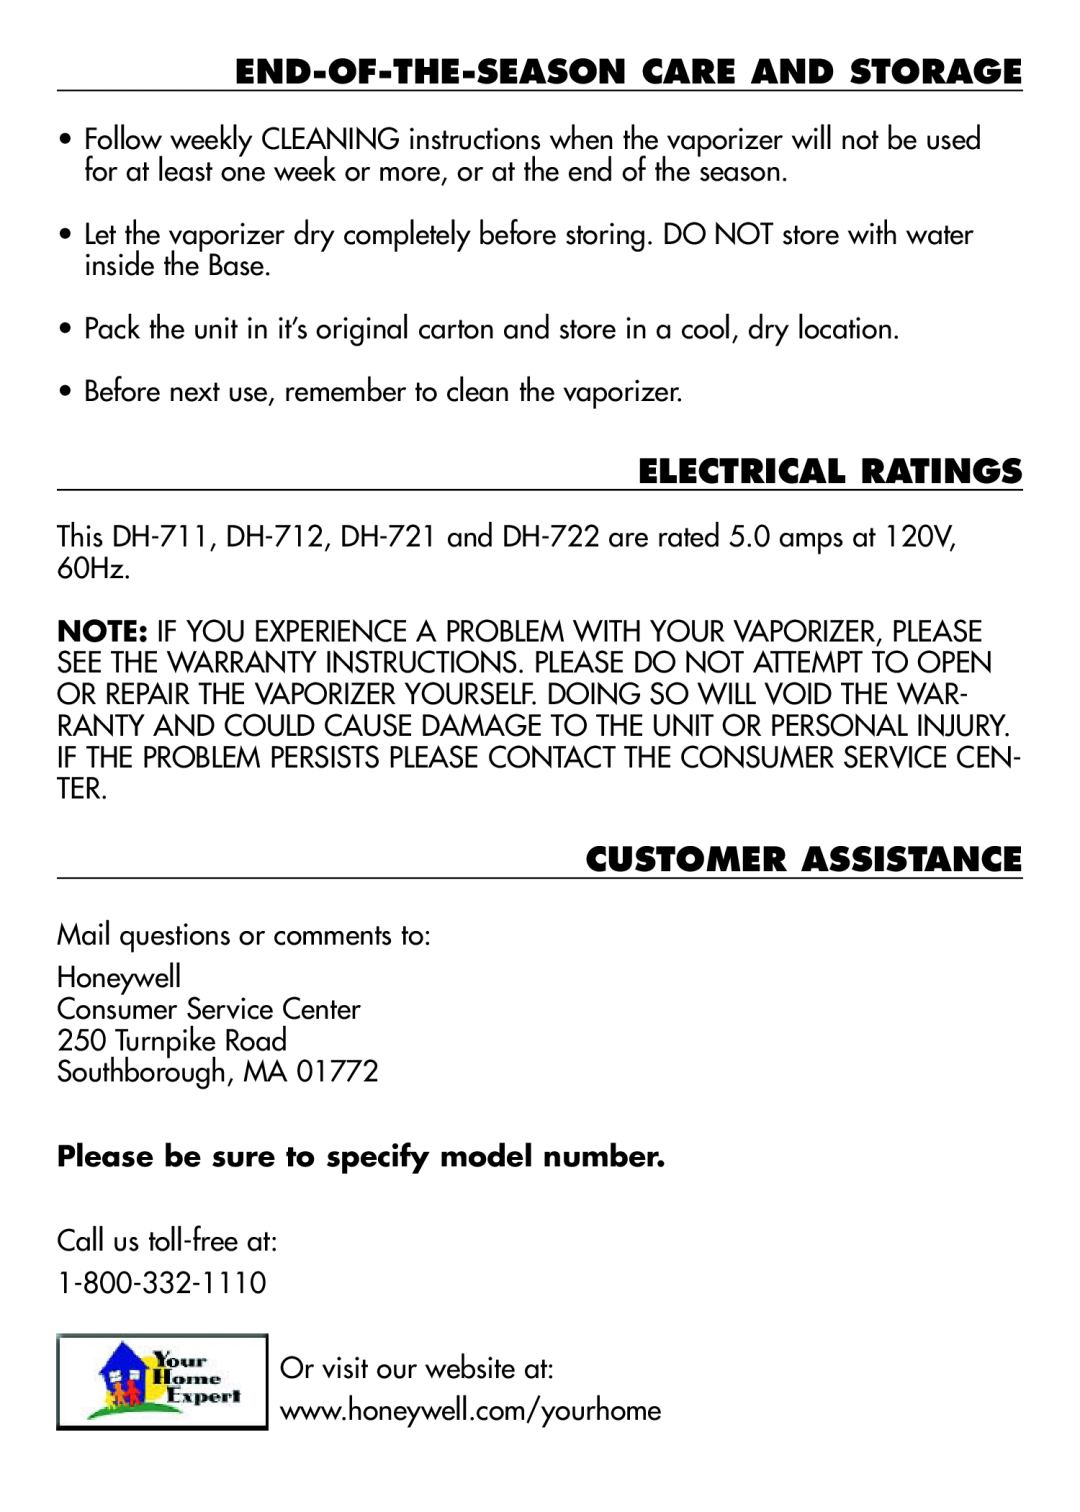 Duracraft DH-711, DH-721, DH-712, DH-722 End-Of-The-Season Care And Storage, Electrical Ratings, Customer Assistance 